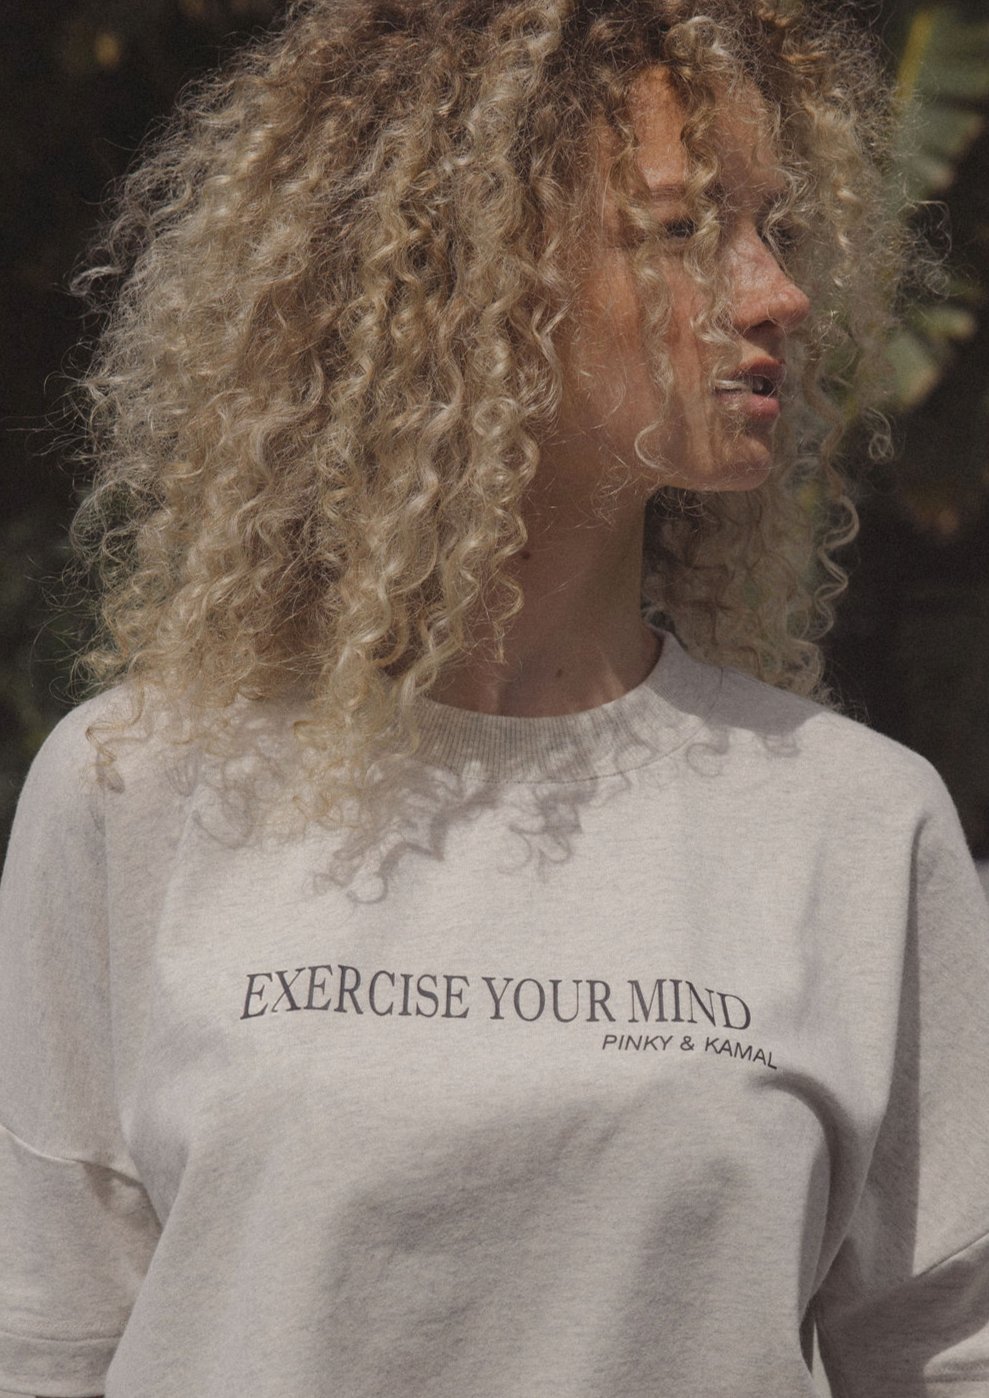 Exercise Your Mind T-Shirt - Grey Marle-Pinky & Kamal-stride